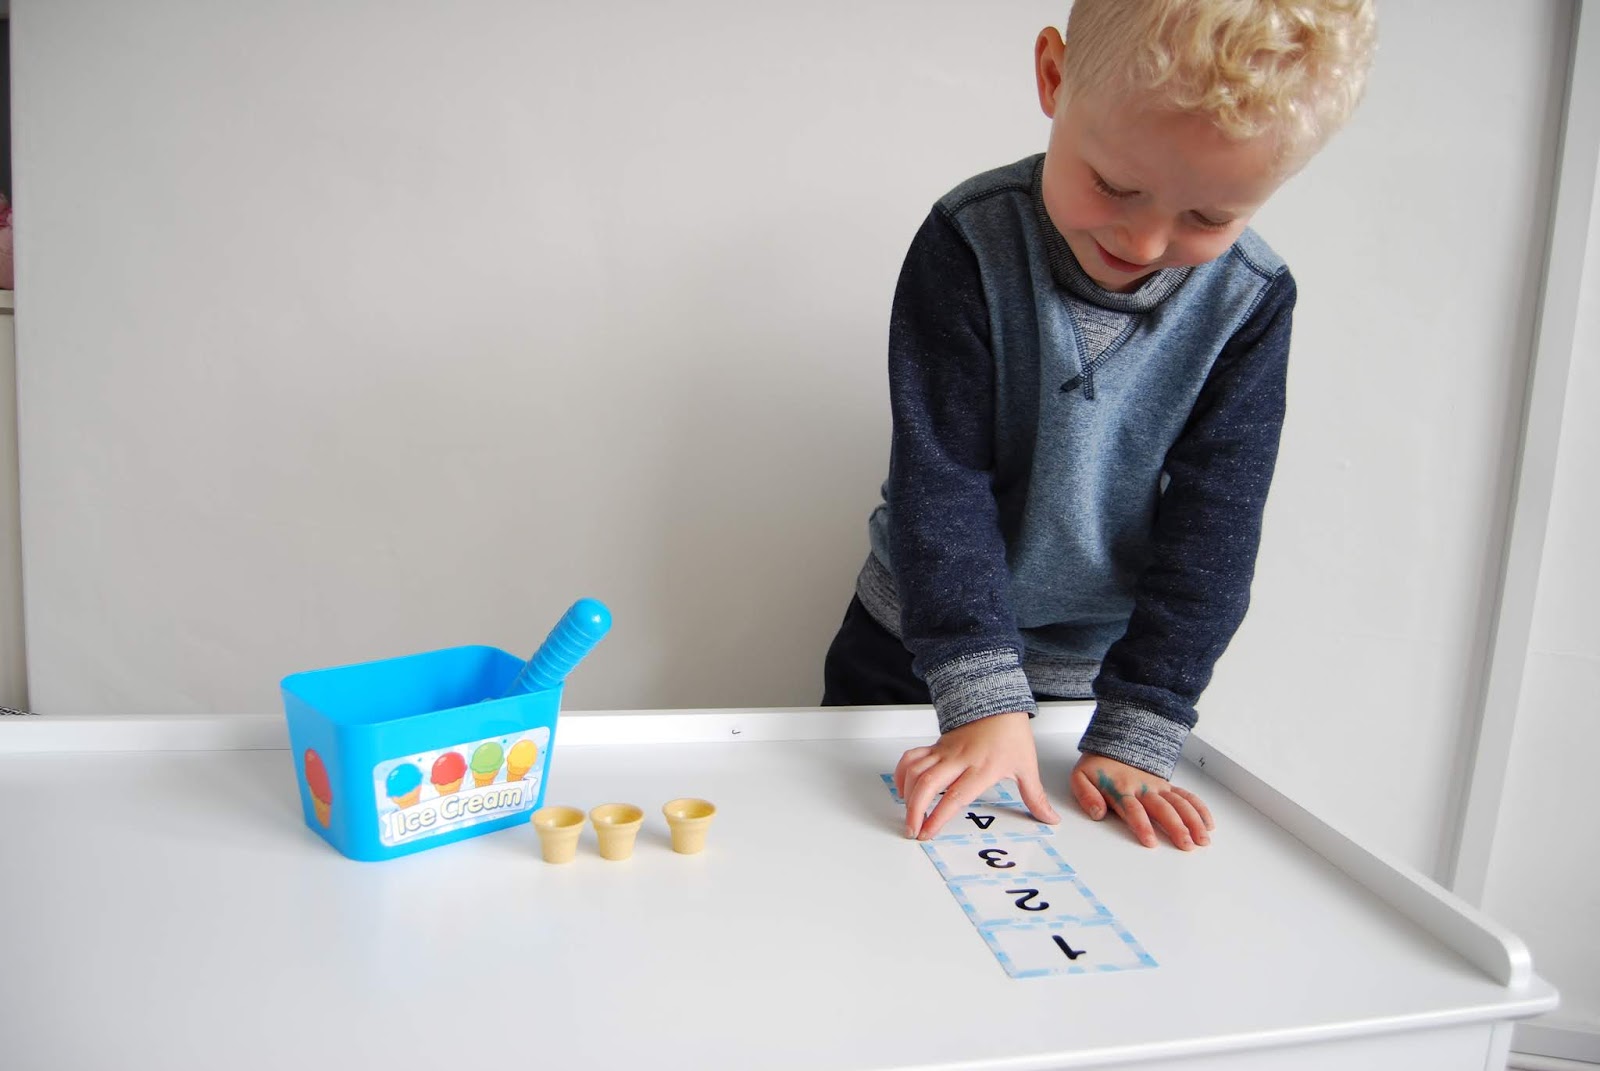 Chic Geek Diary: Learning Resources Smart Scoops Math Set - Review